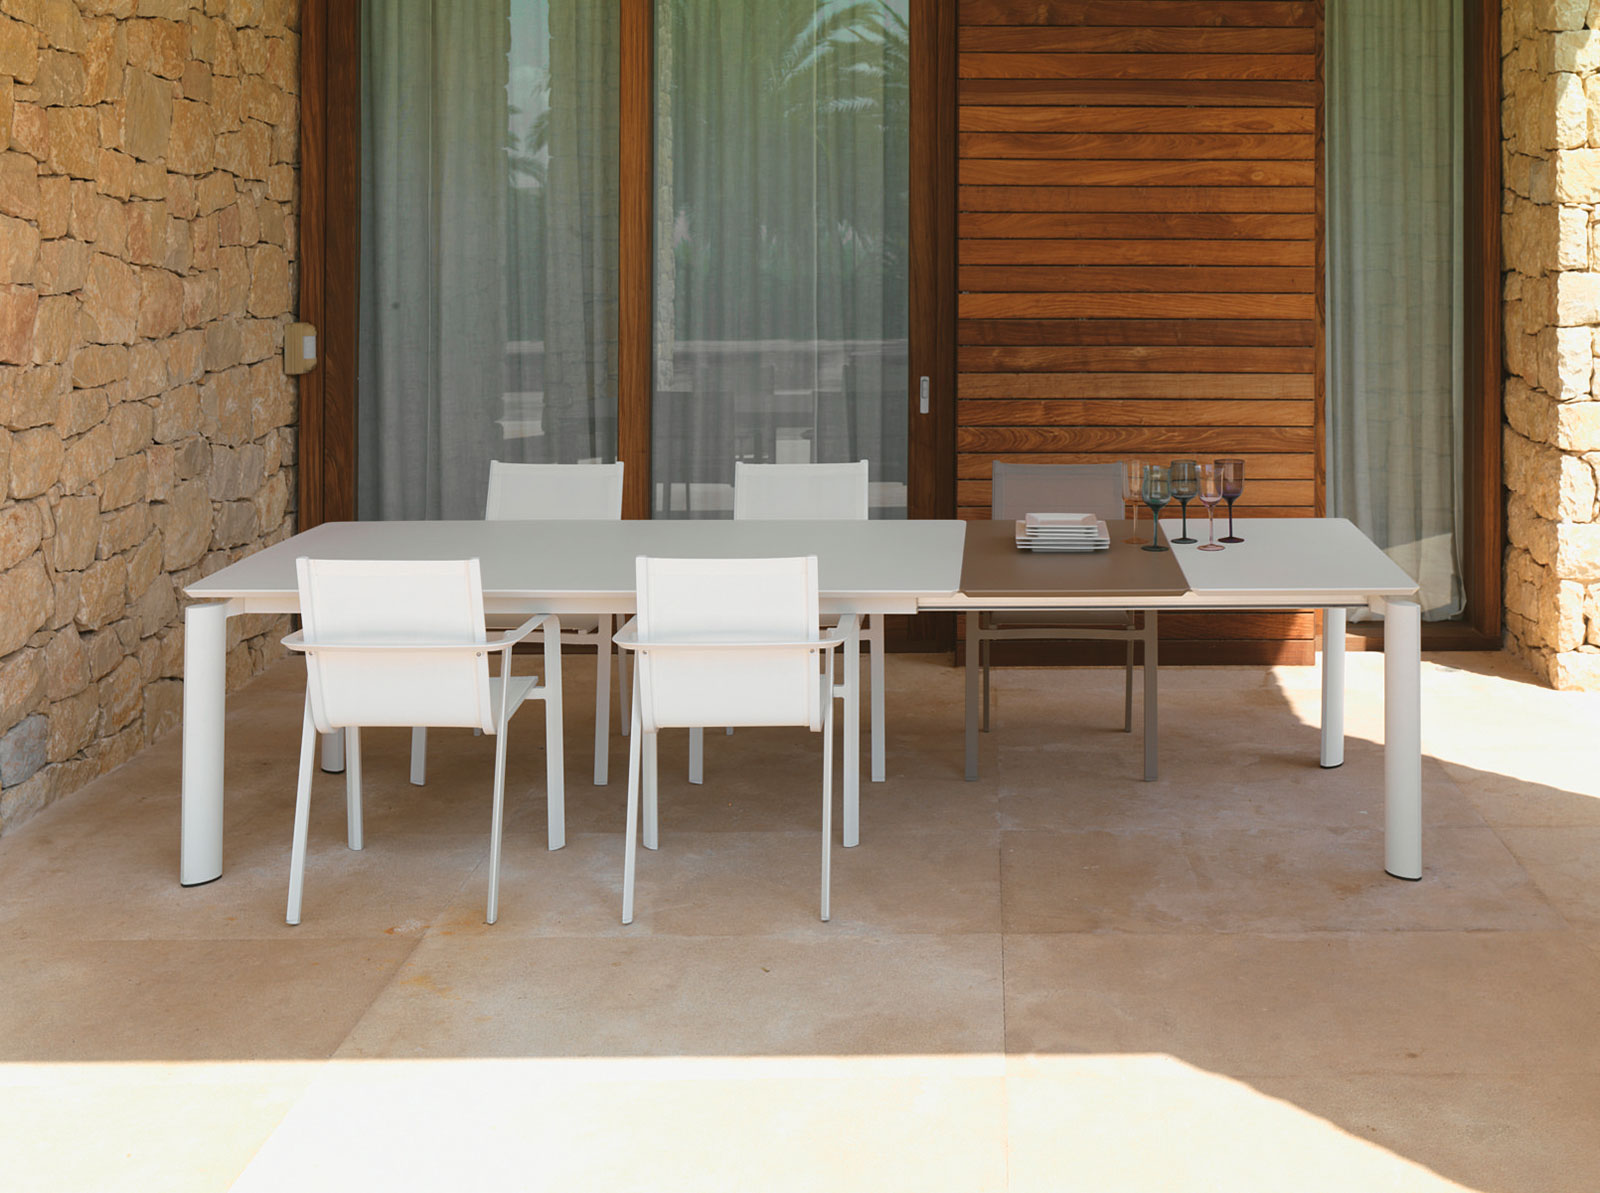 Margot is an aluminum patio dining table designed by Marco Acerbis. Enhance your outdoor furnishings with this modern and elegant aluminum outdoor dining table.